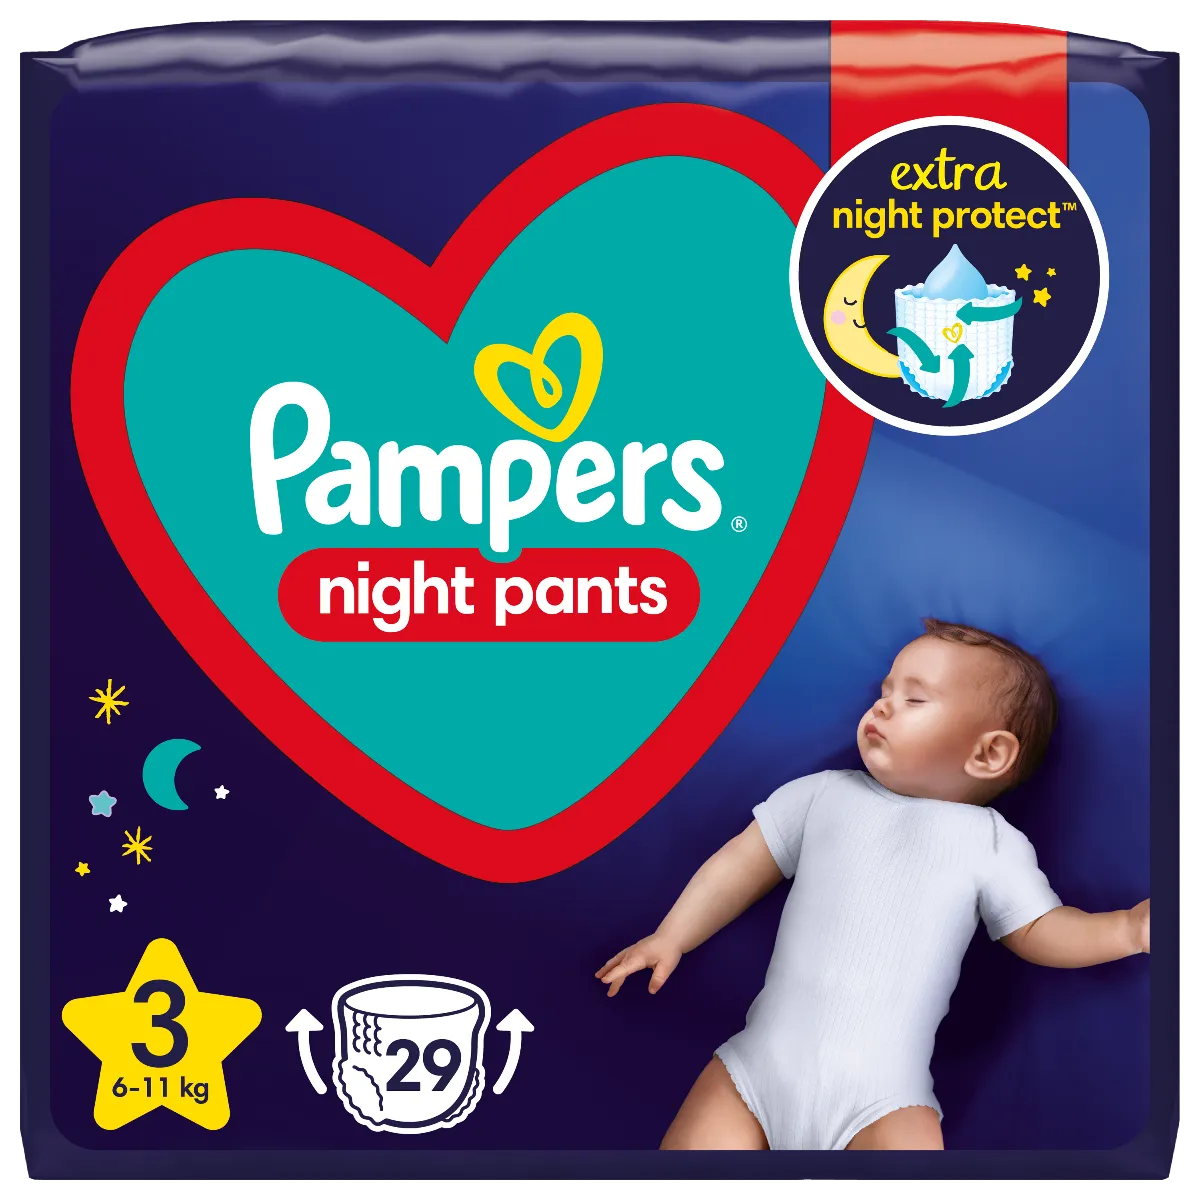 pampers pants 4 46